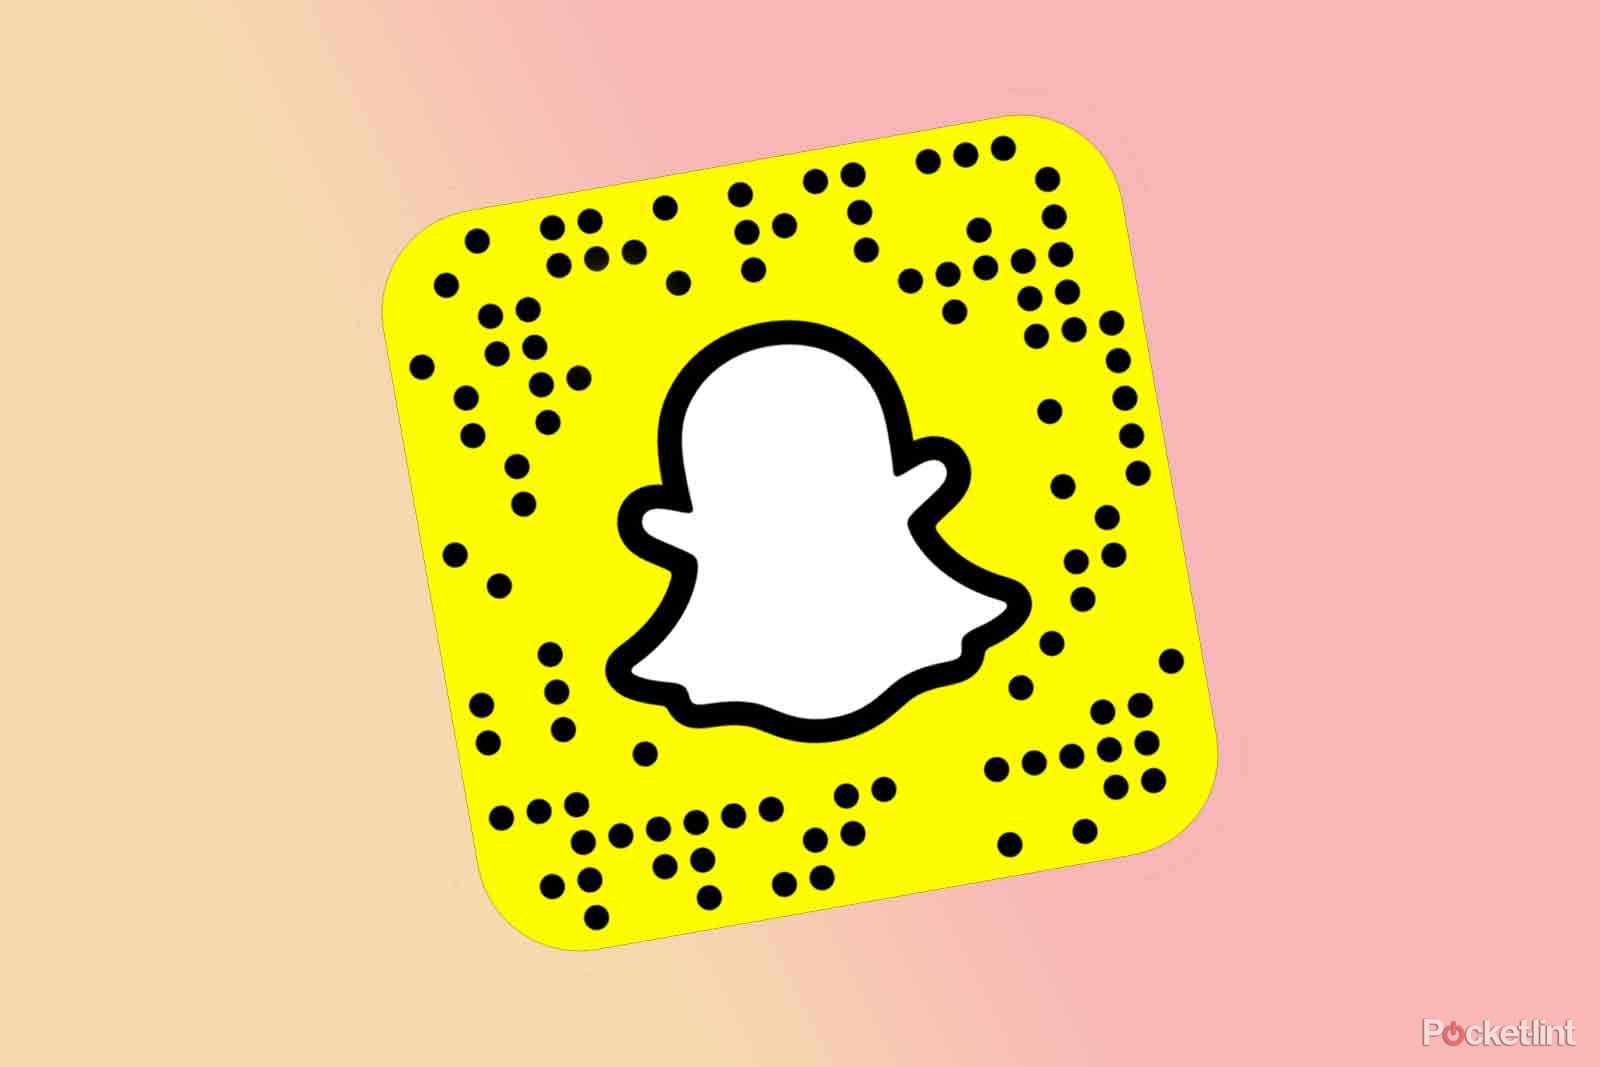 How to scan a Snapcode on Snapchat